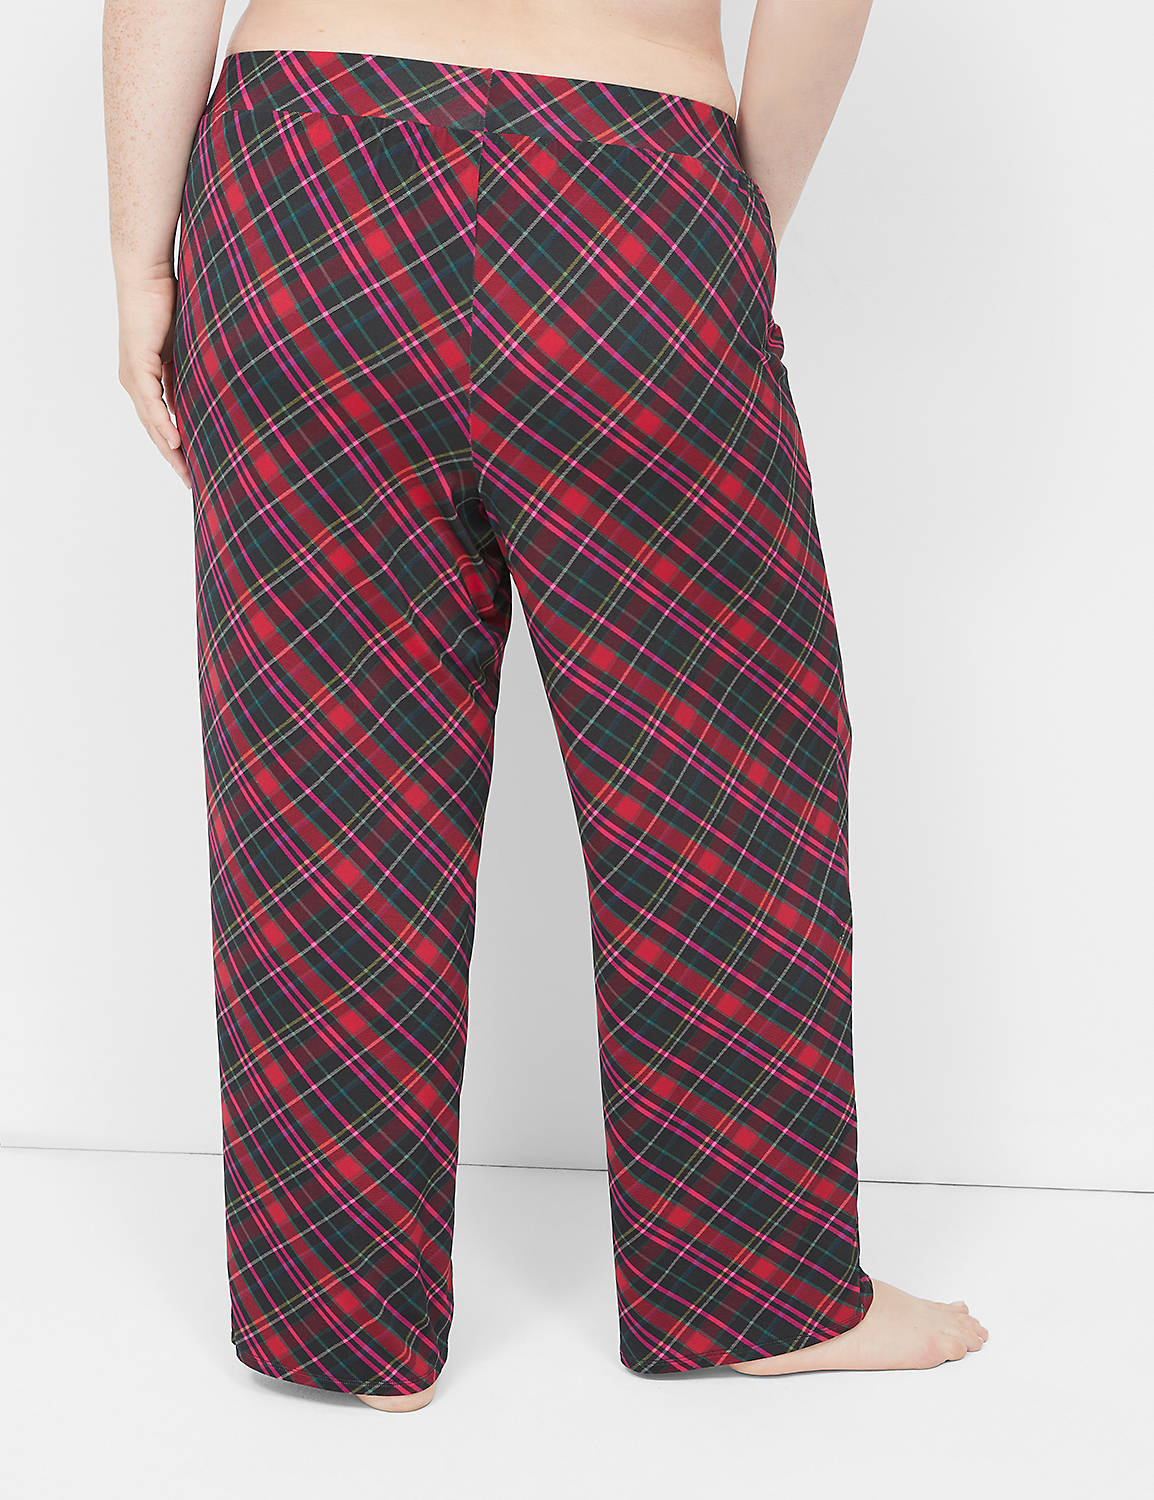 Sustainable Dreamy Cool Block Pant Product Image 2